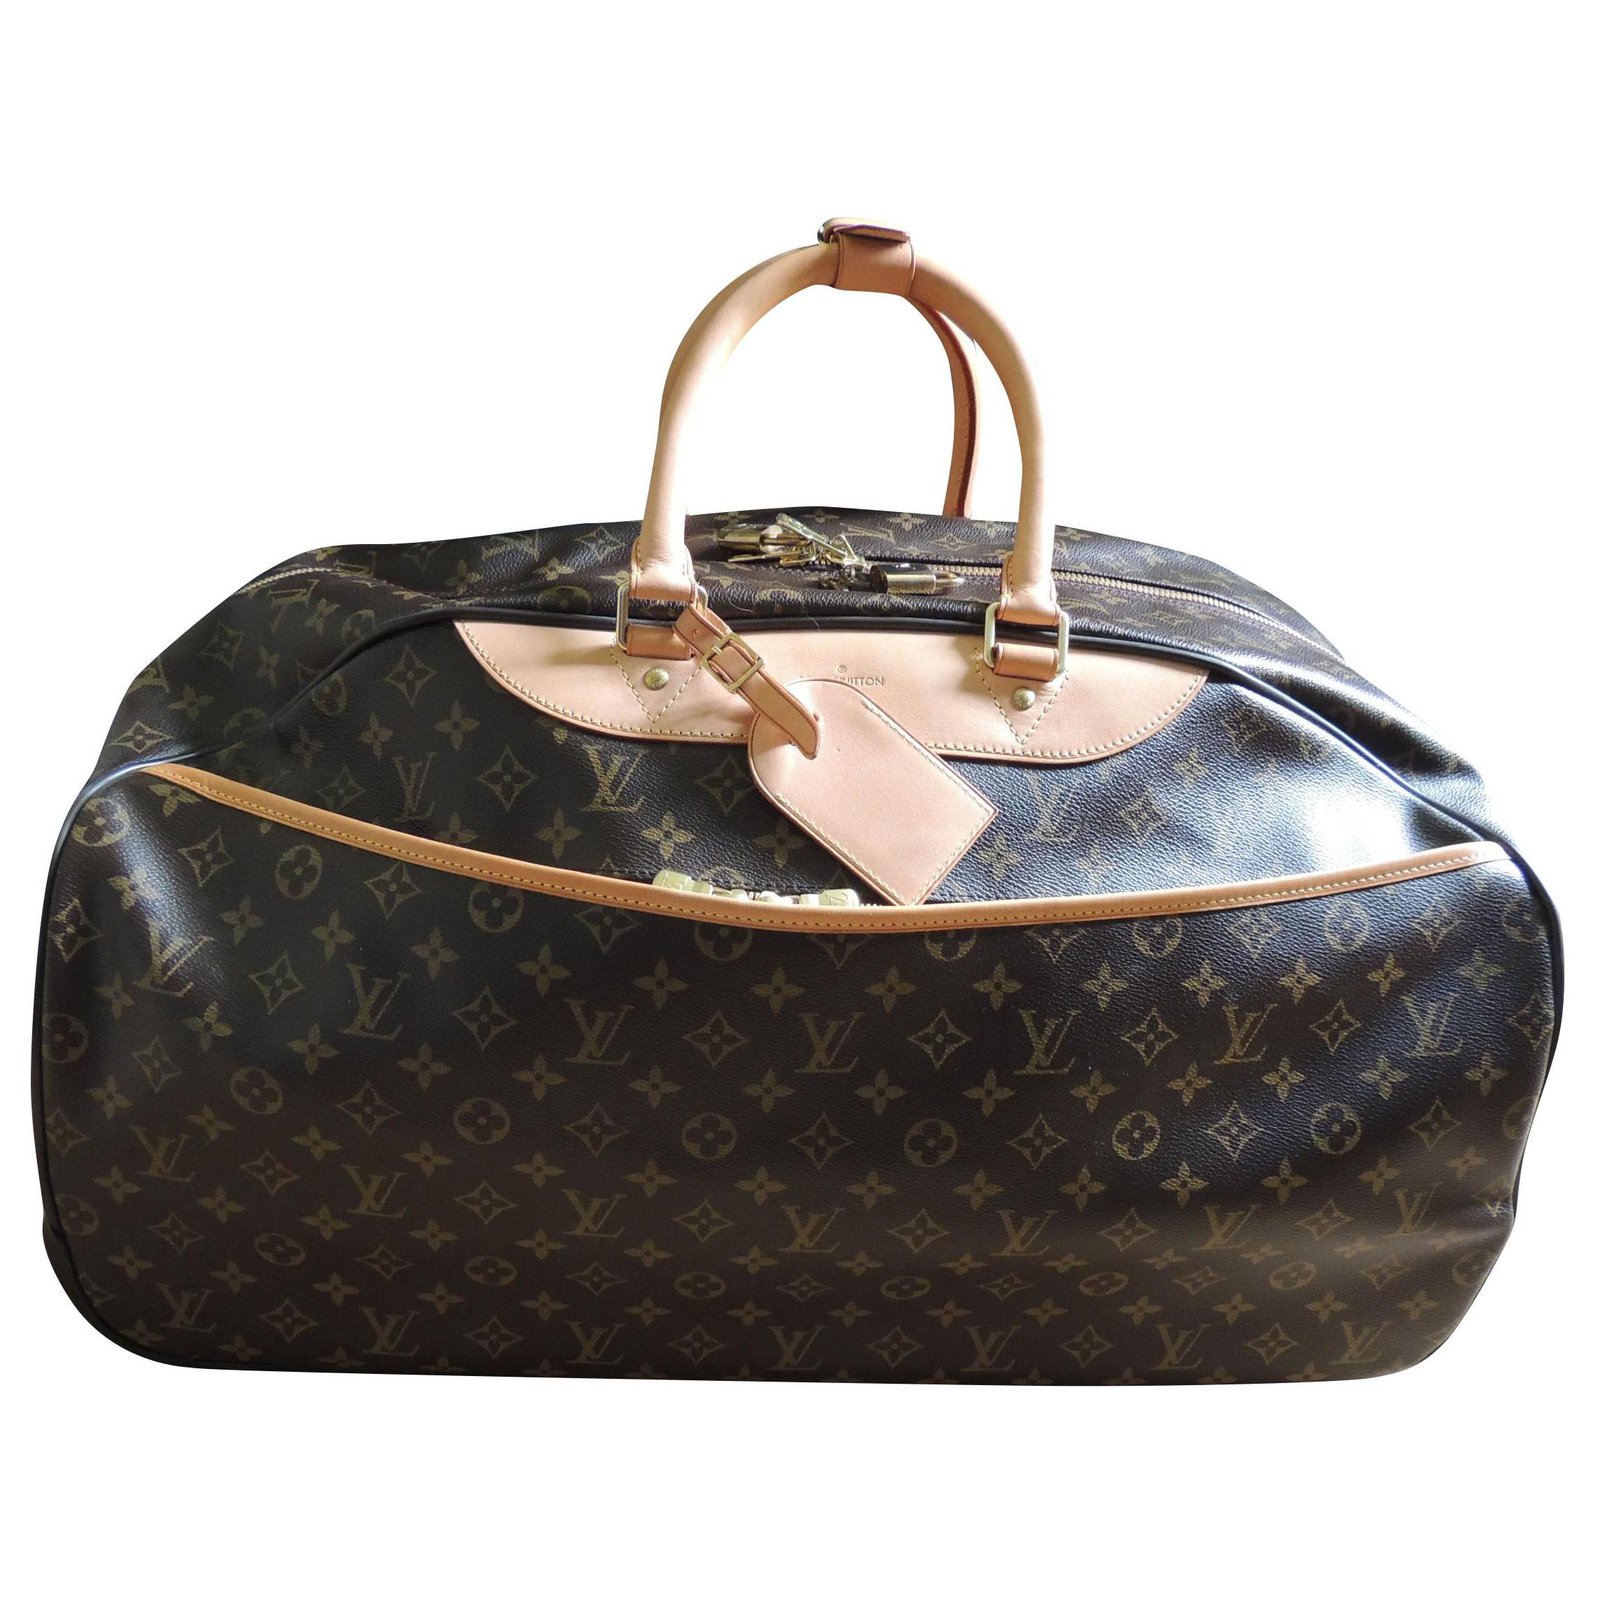 LOUIS VUITTON LUGGAGE EOLE 60 BROWN MONOGRAM GREAT GIFT - clothing